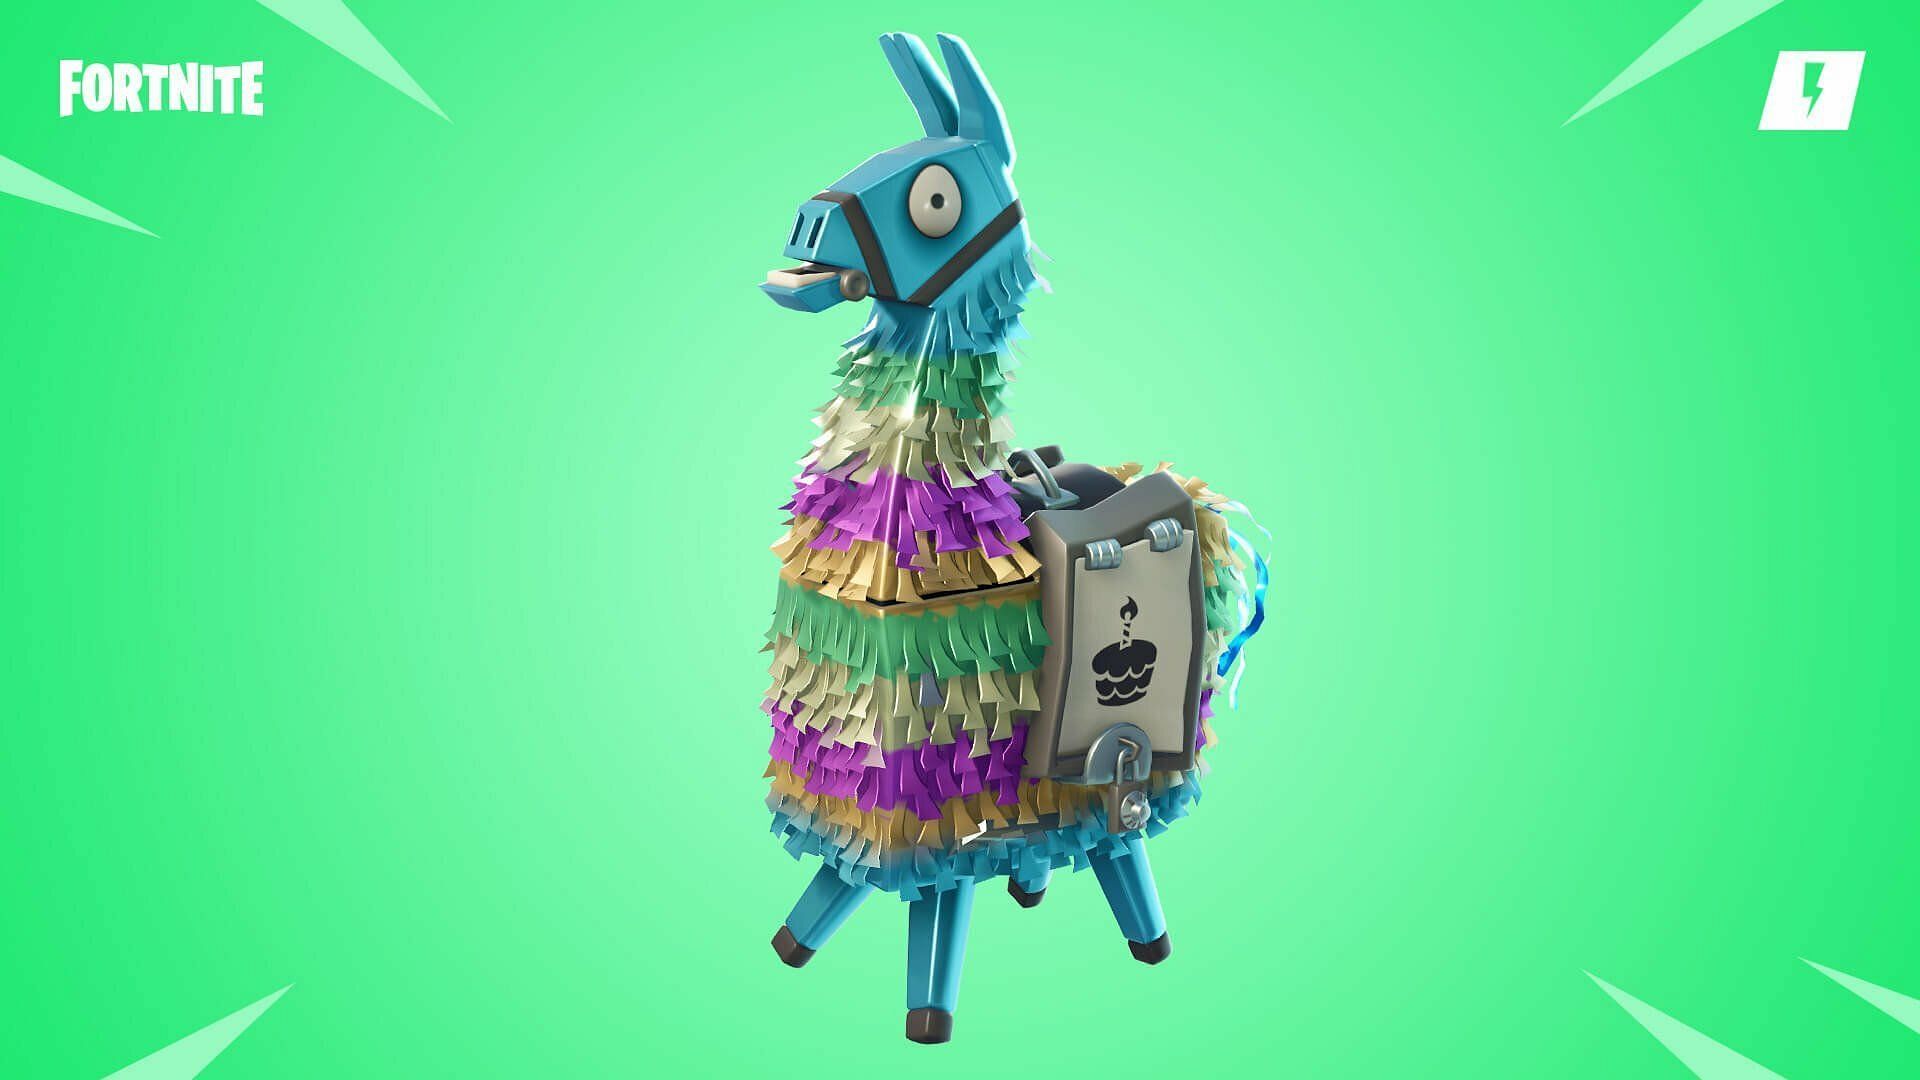 A Llama on a barbeque will definitely give you nightmares (Image via Epic Games)